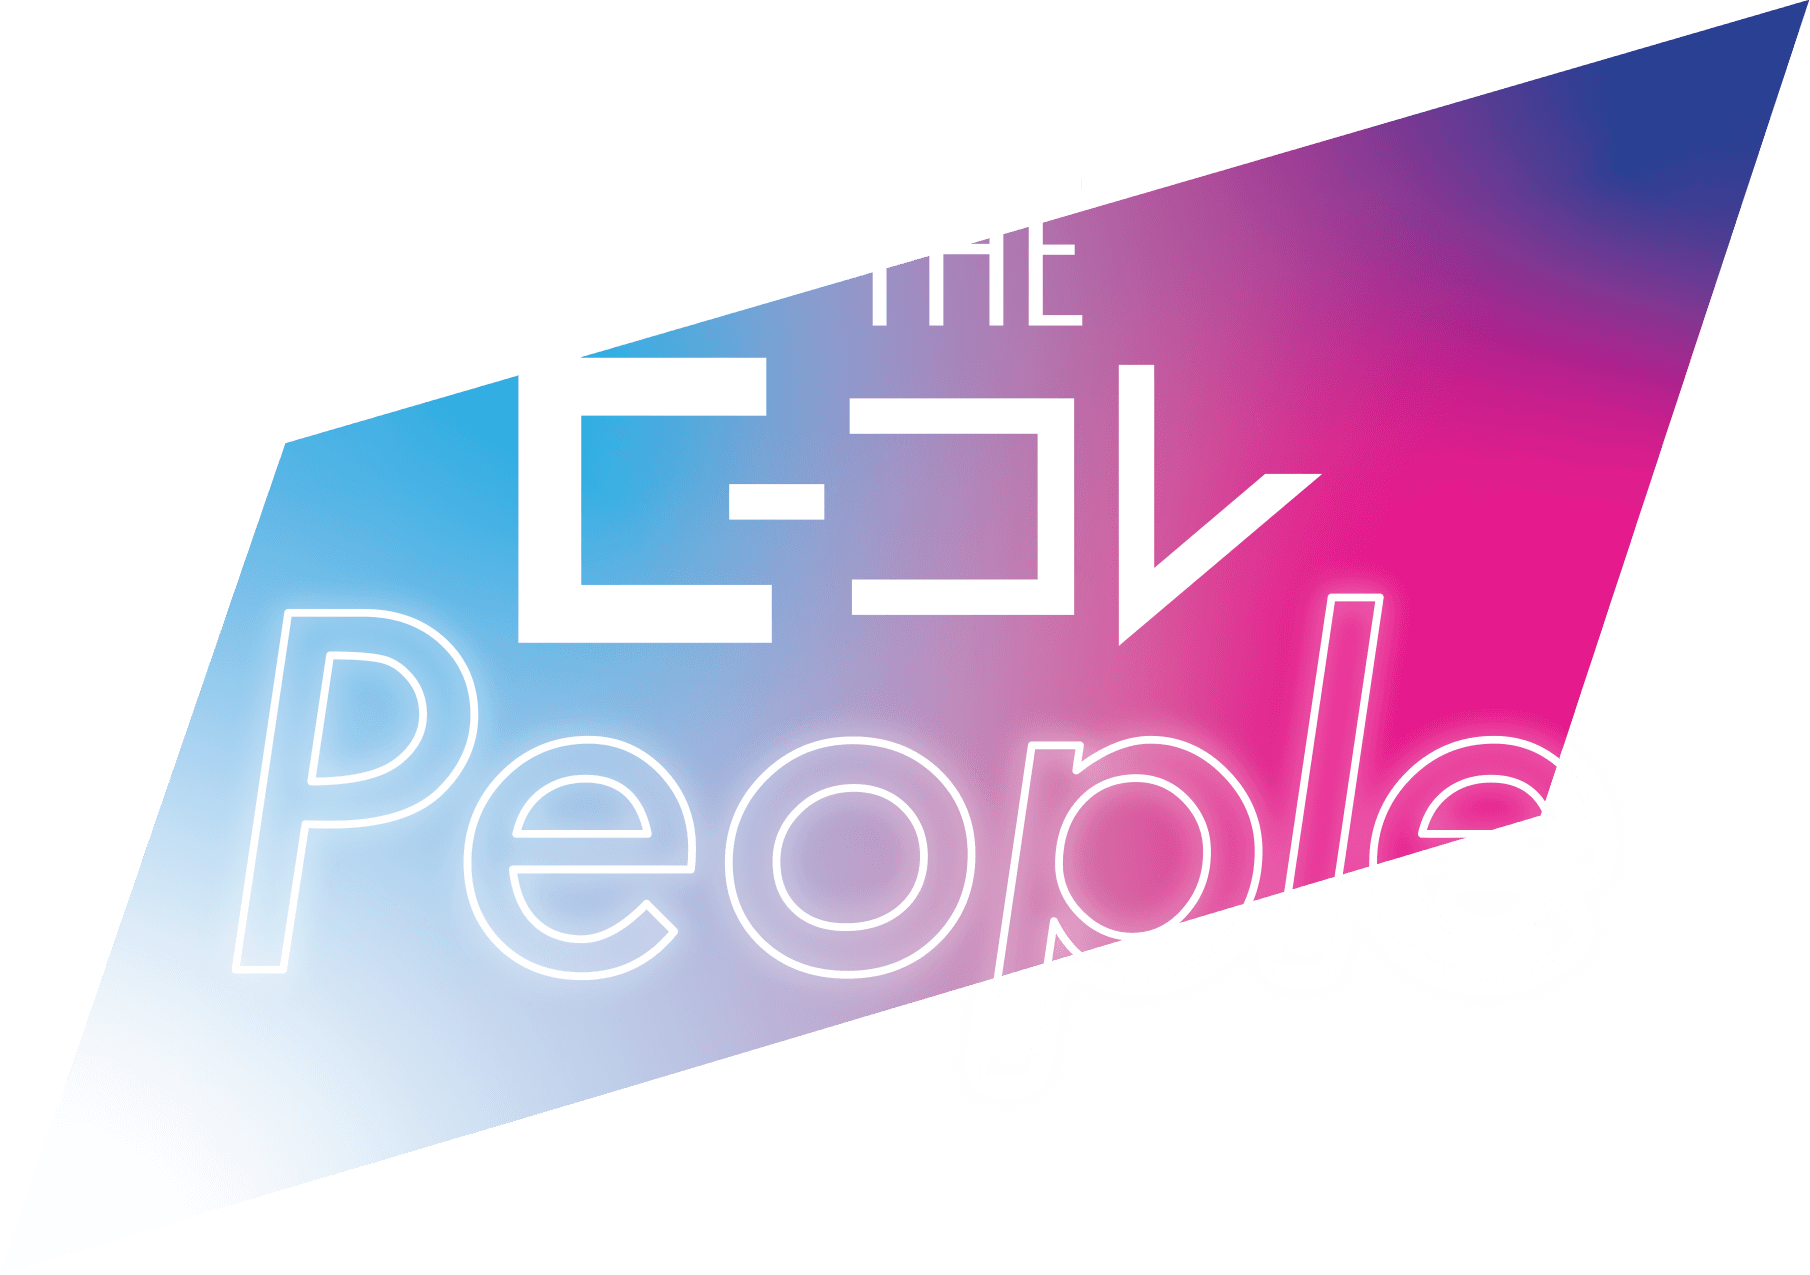 THE E-コレ PEOPLE